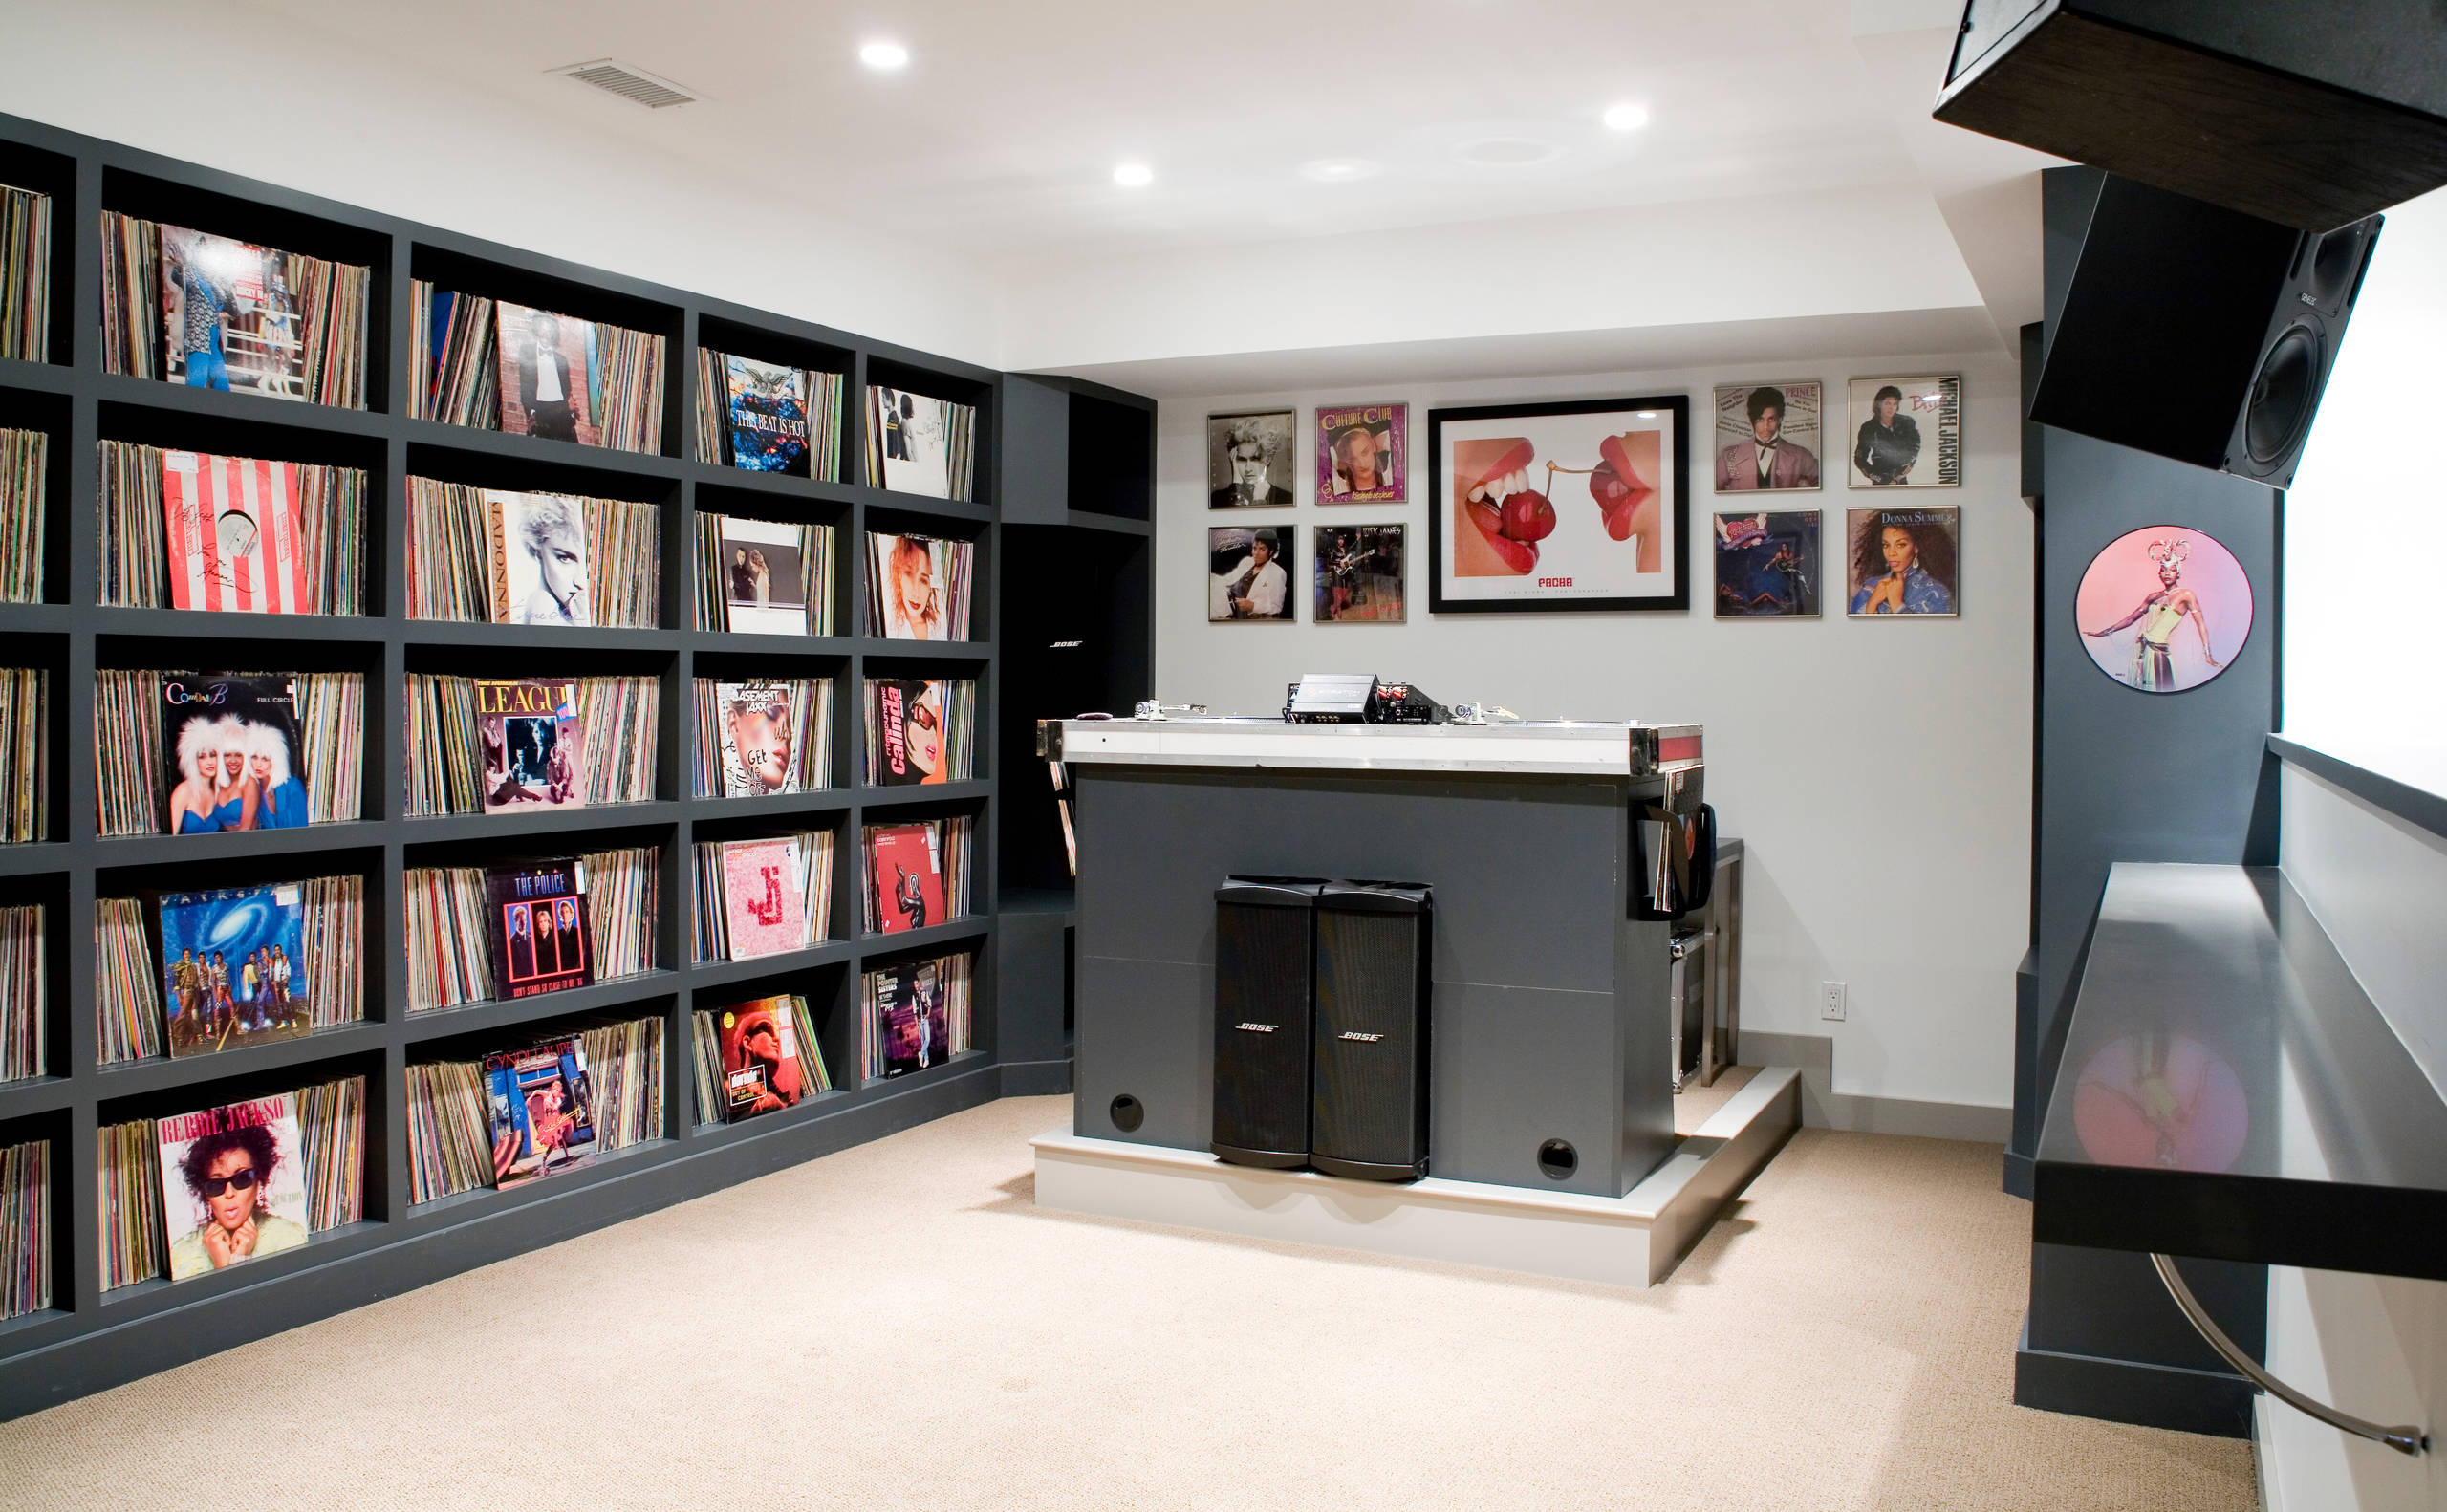 Music/DJ Room - Transitional - Home Theater - Boston - by LDa Architecture  & Interiors | Houzz